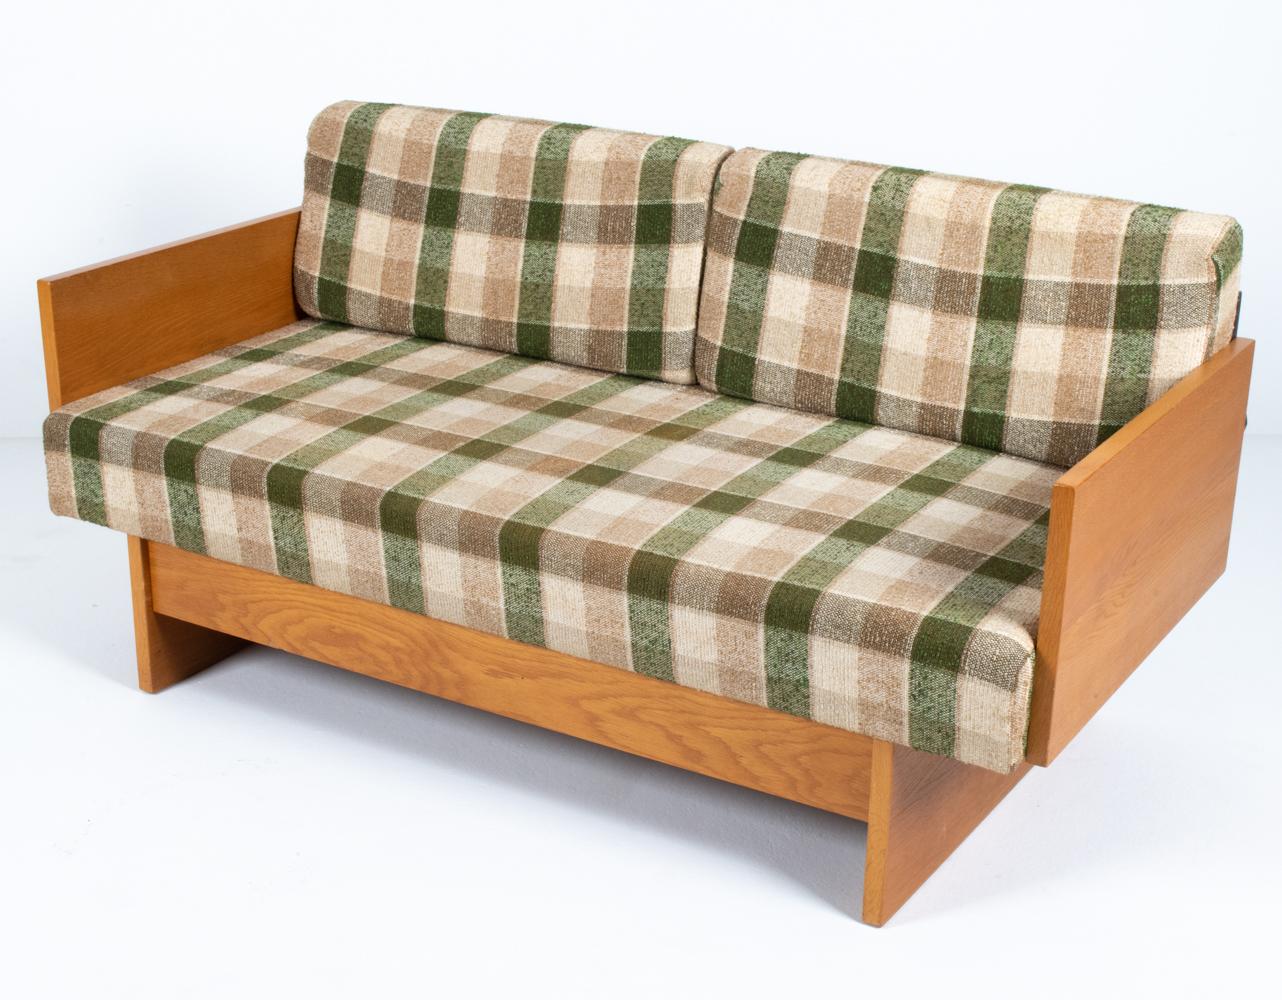 Take relaxation to a new level of style with this Danish mid-century convertible sofa/daybed. Attributed to iconic 20th century Danish designer Borge Mogensen, this sofa features a minimalist wooden frame in sturdy oak with plaid cushions. Fold down